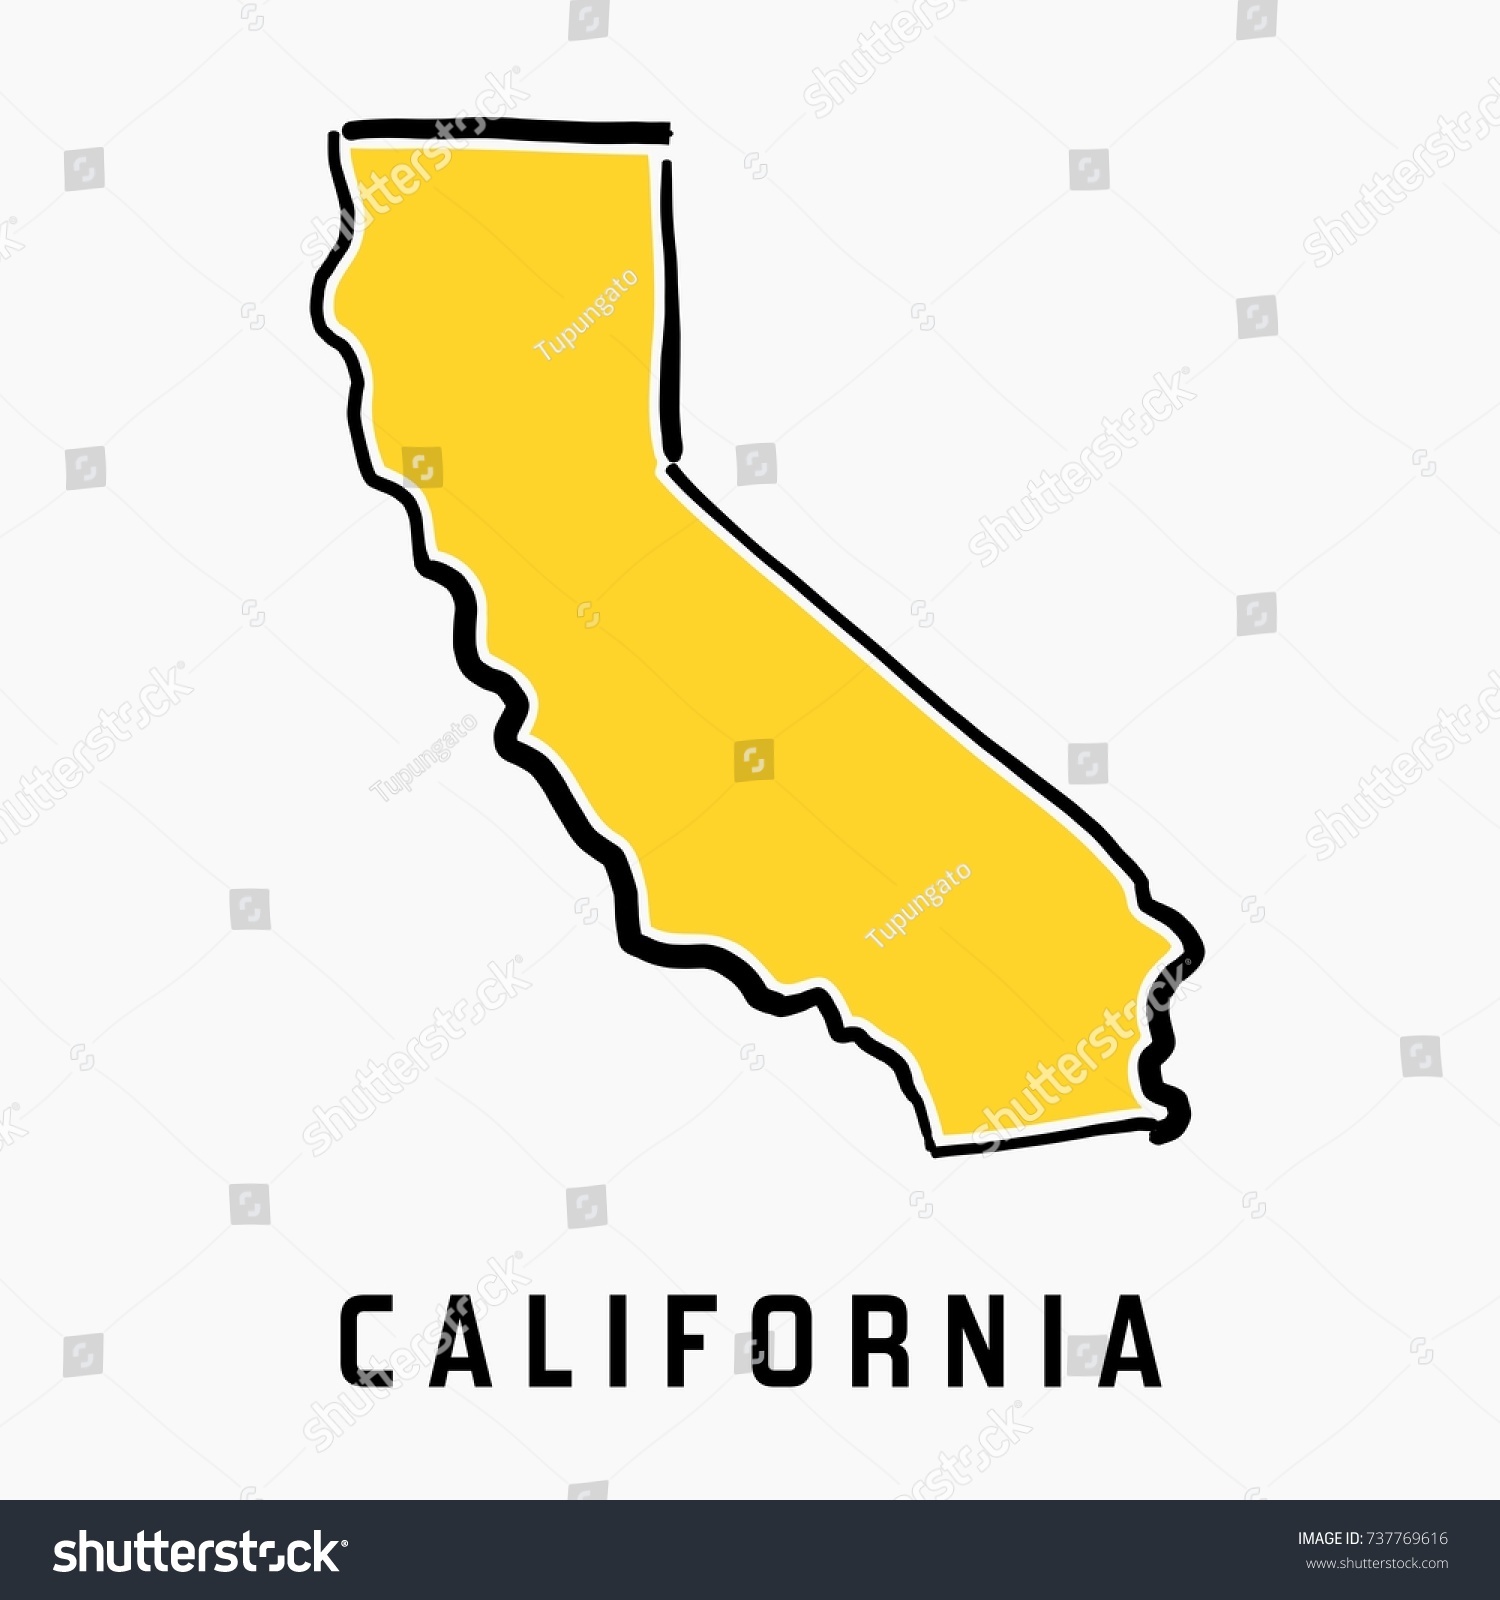 California Map Outline Smooth Simplified Us Stock Vector Royalty Free 737769616 Shutterstock 0223